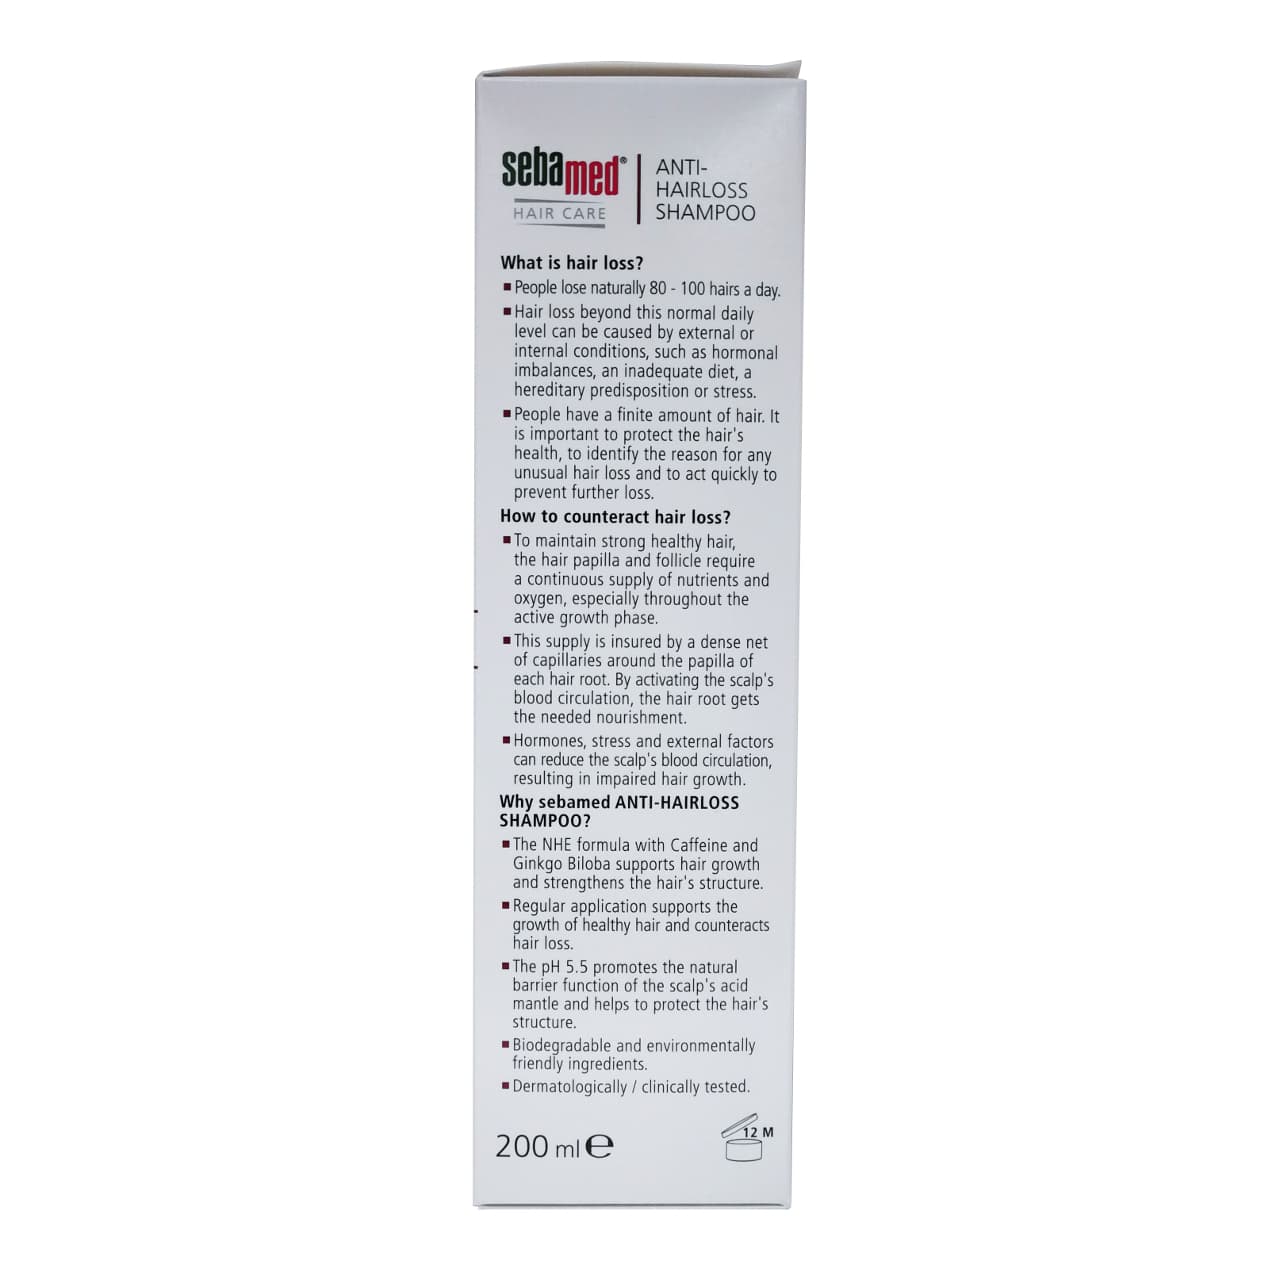 Product and hair loss information for Sebamed Hair Care Anti-Hairloss Shampoo in English